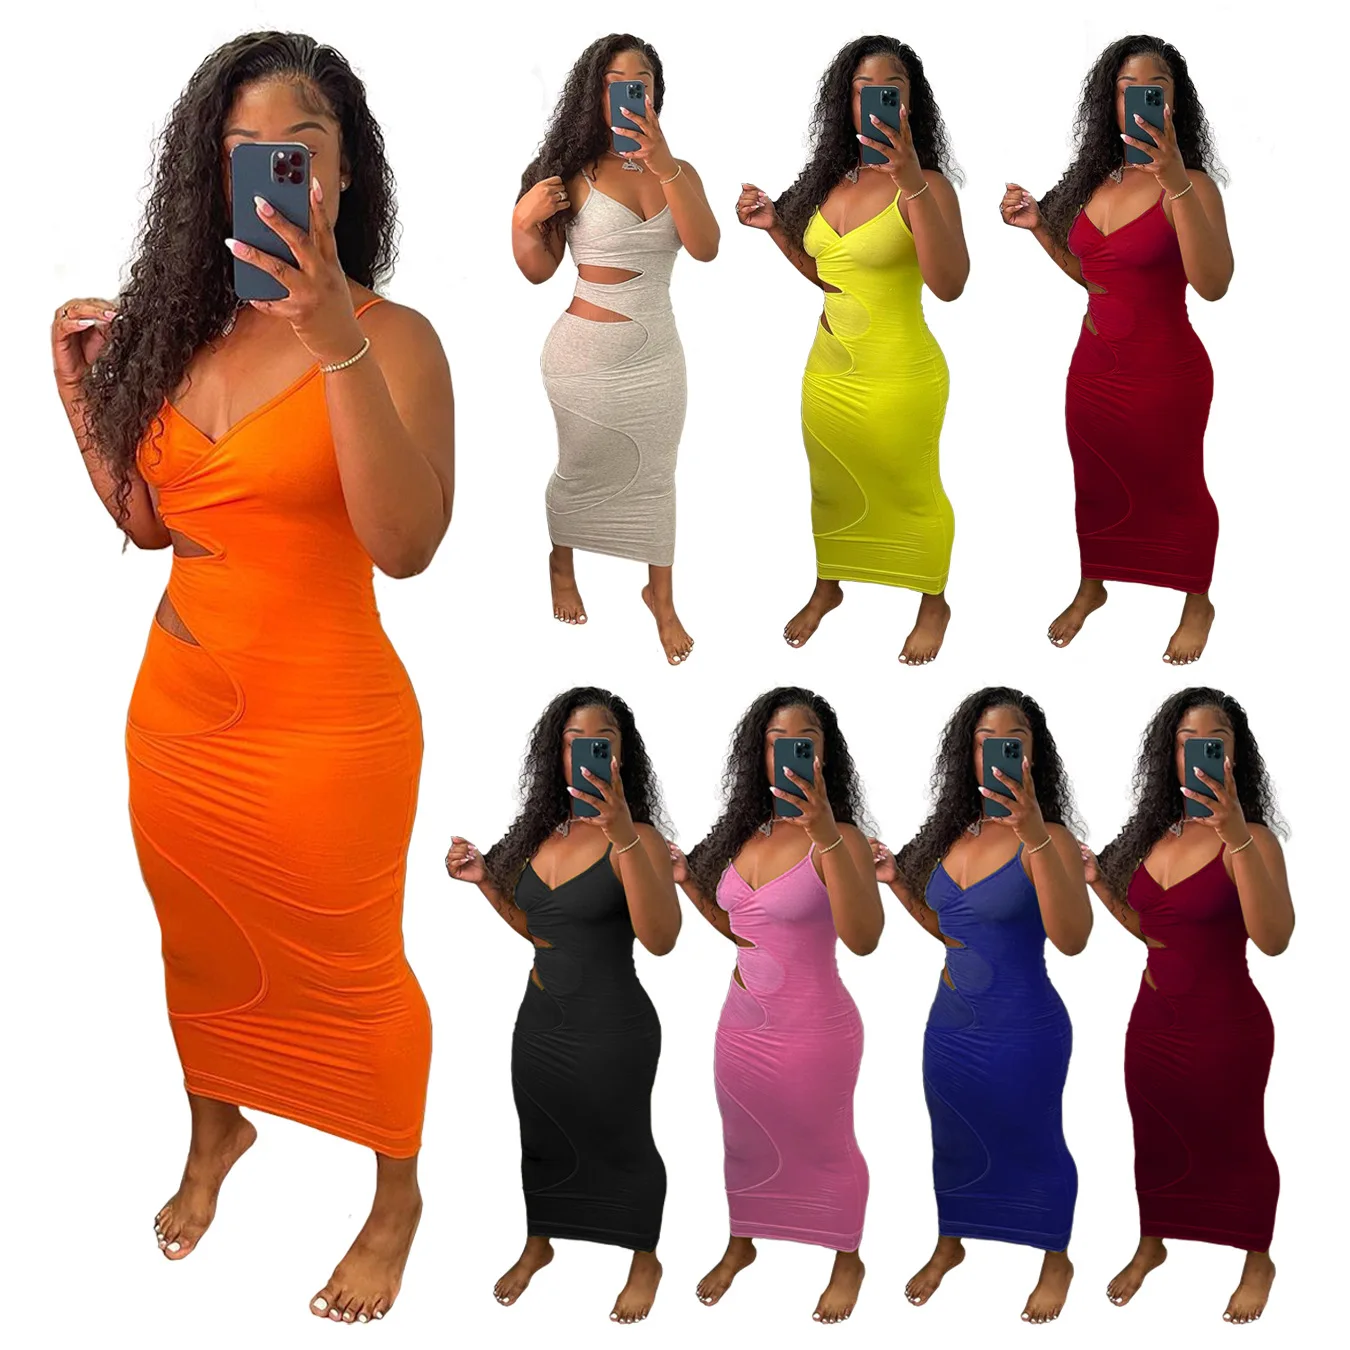 

HOBISH-8003 Summer Amazon hot sale plus size spring and summer new solid color sexy dress women